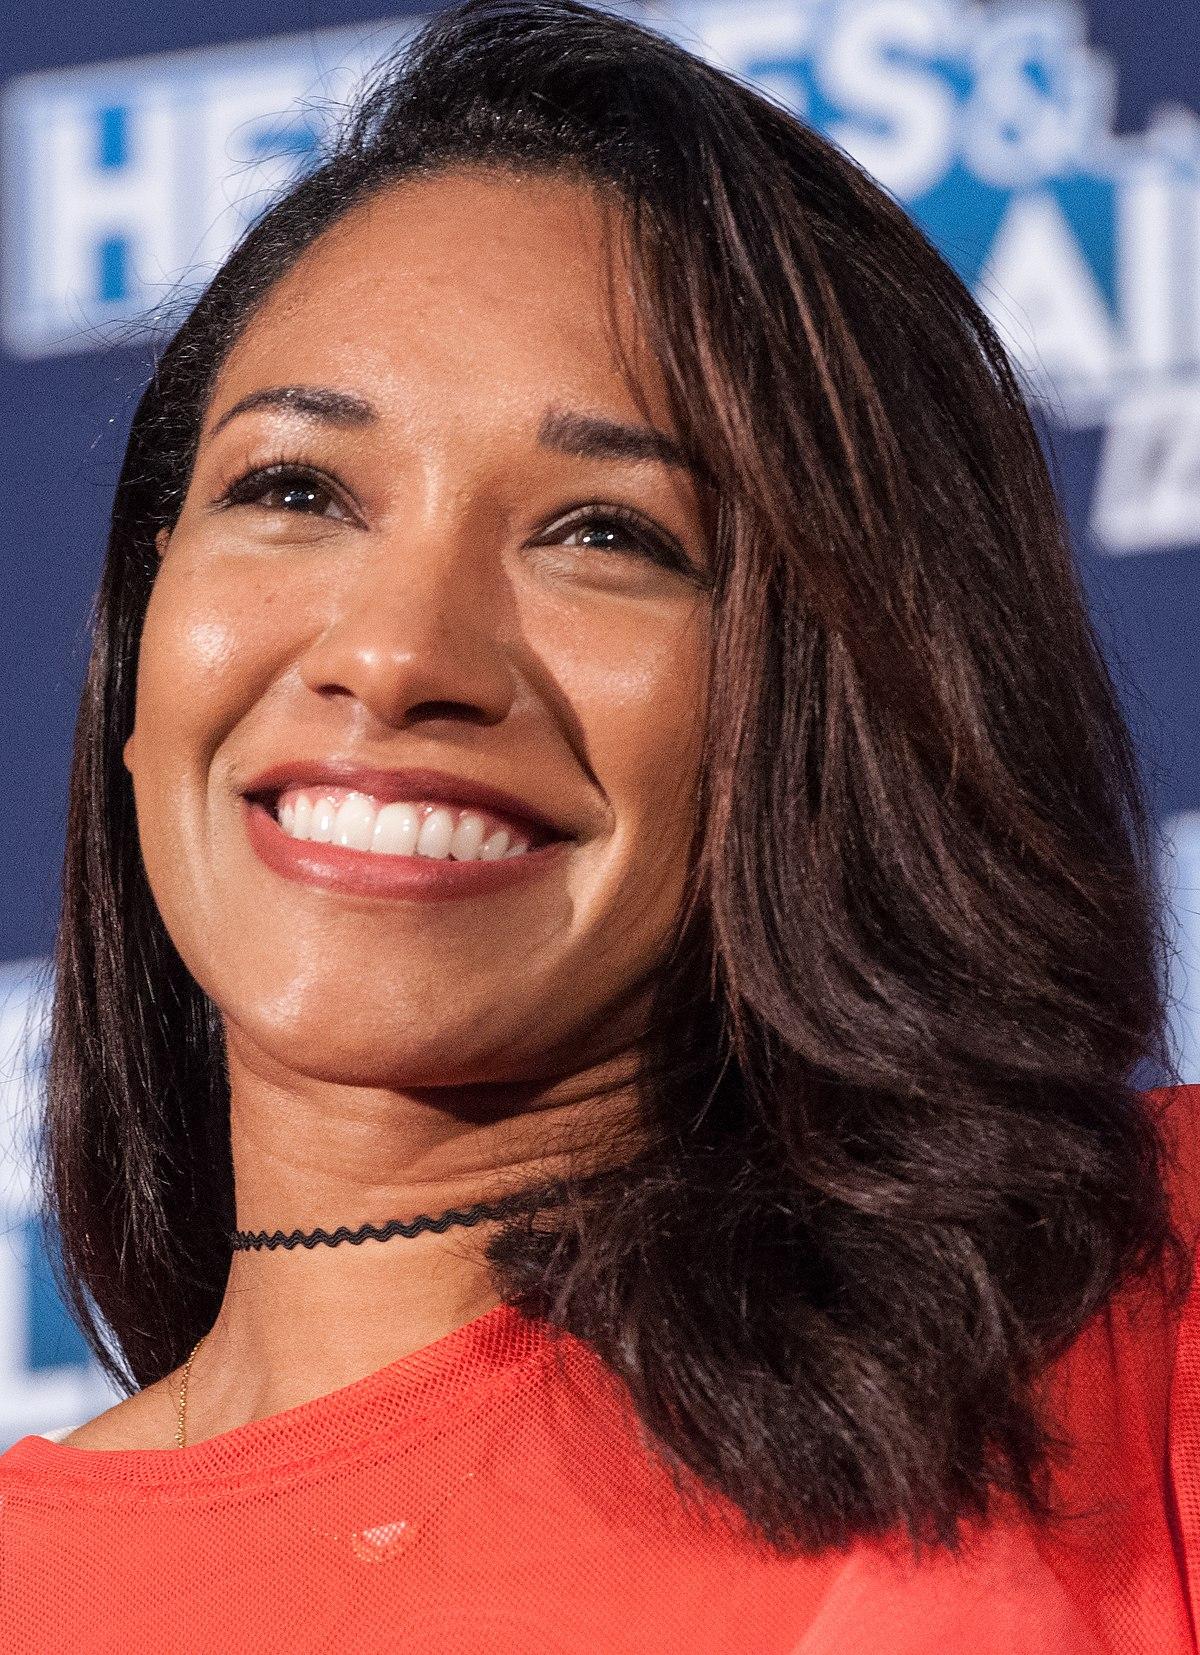 70+ Hot Pictures Of Candice Patton Who Plays Iris West In Flash TV Series 370